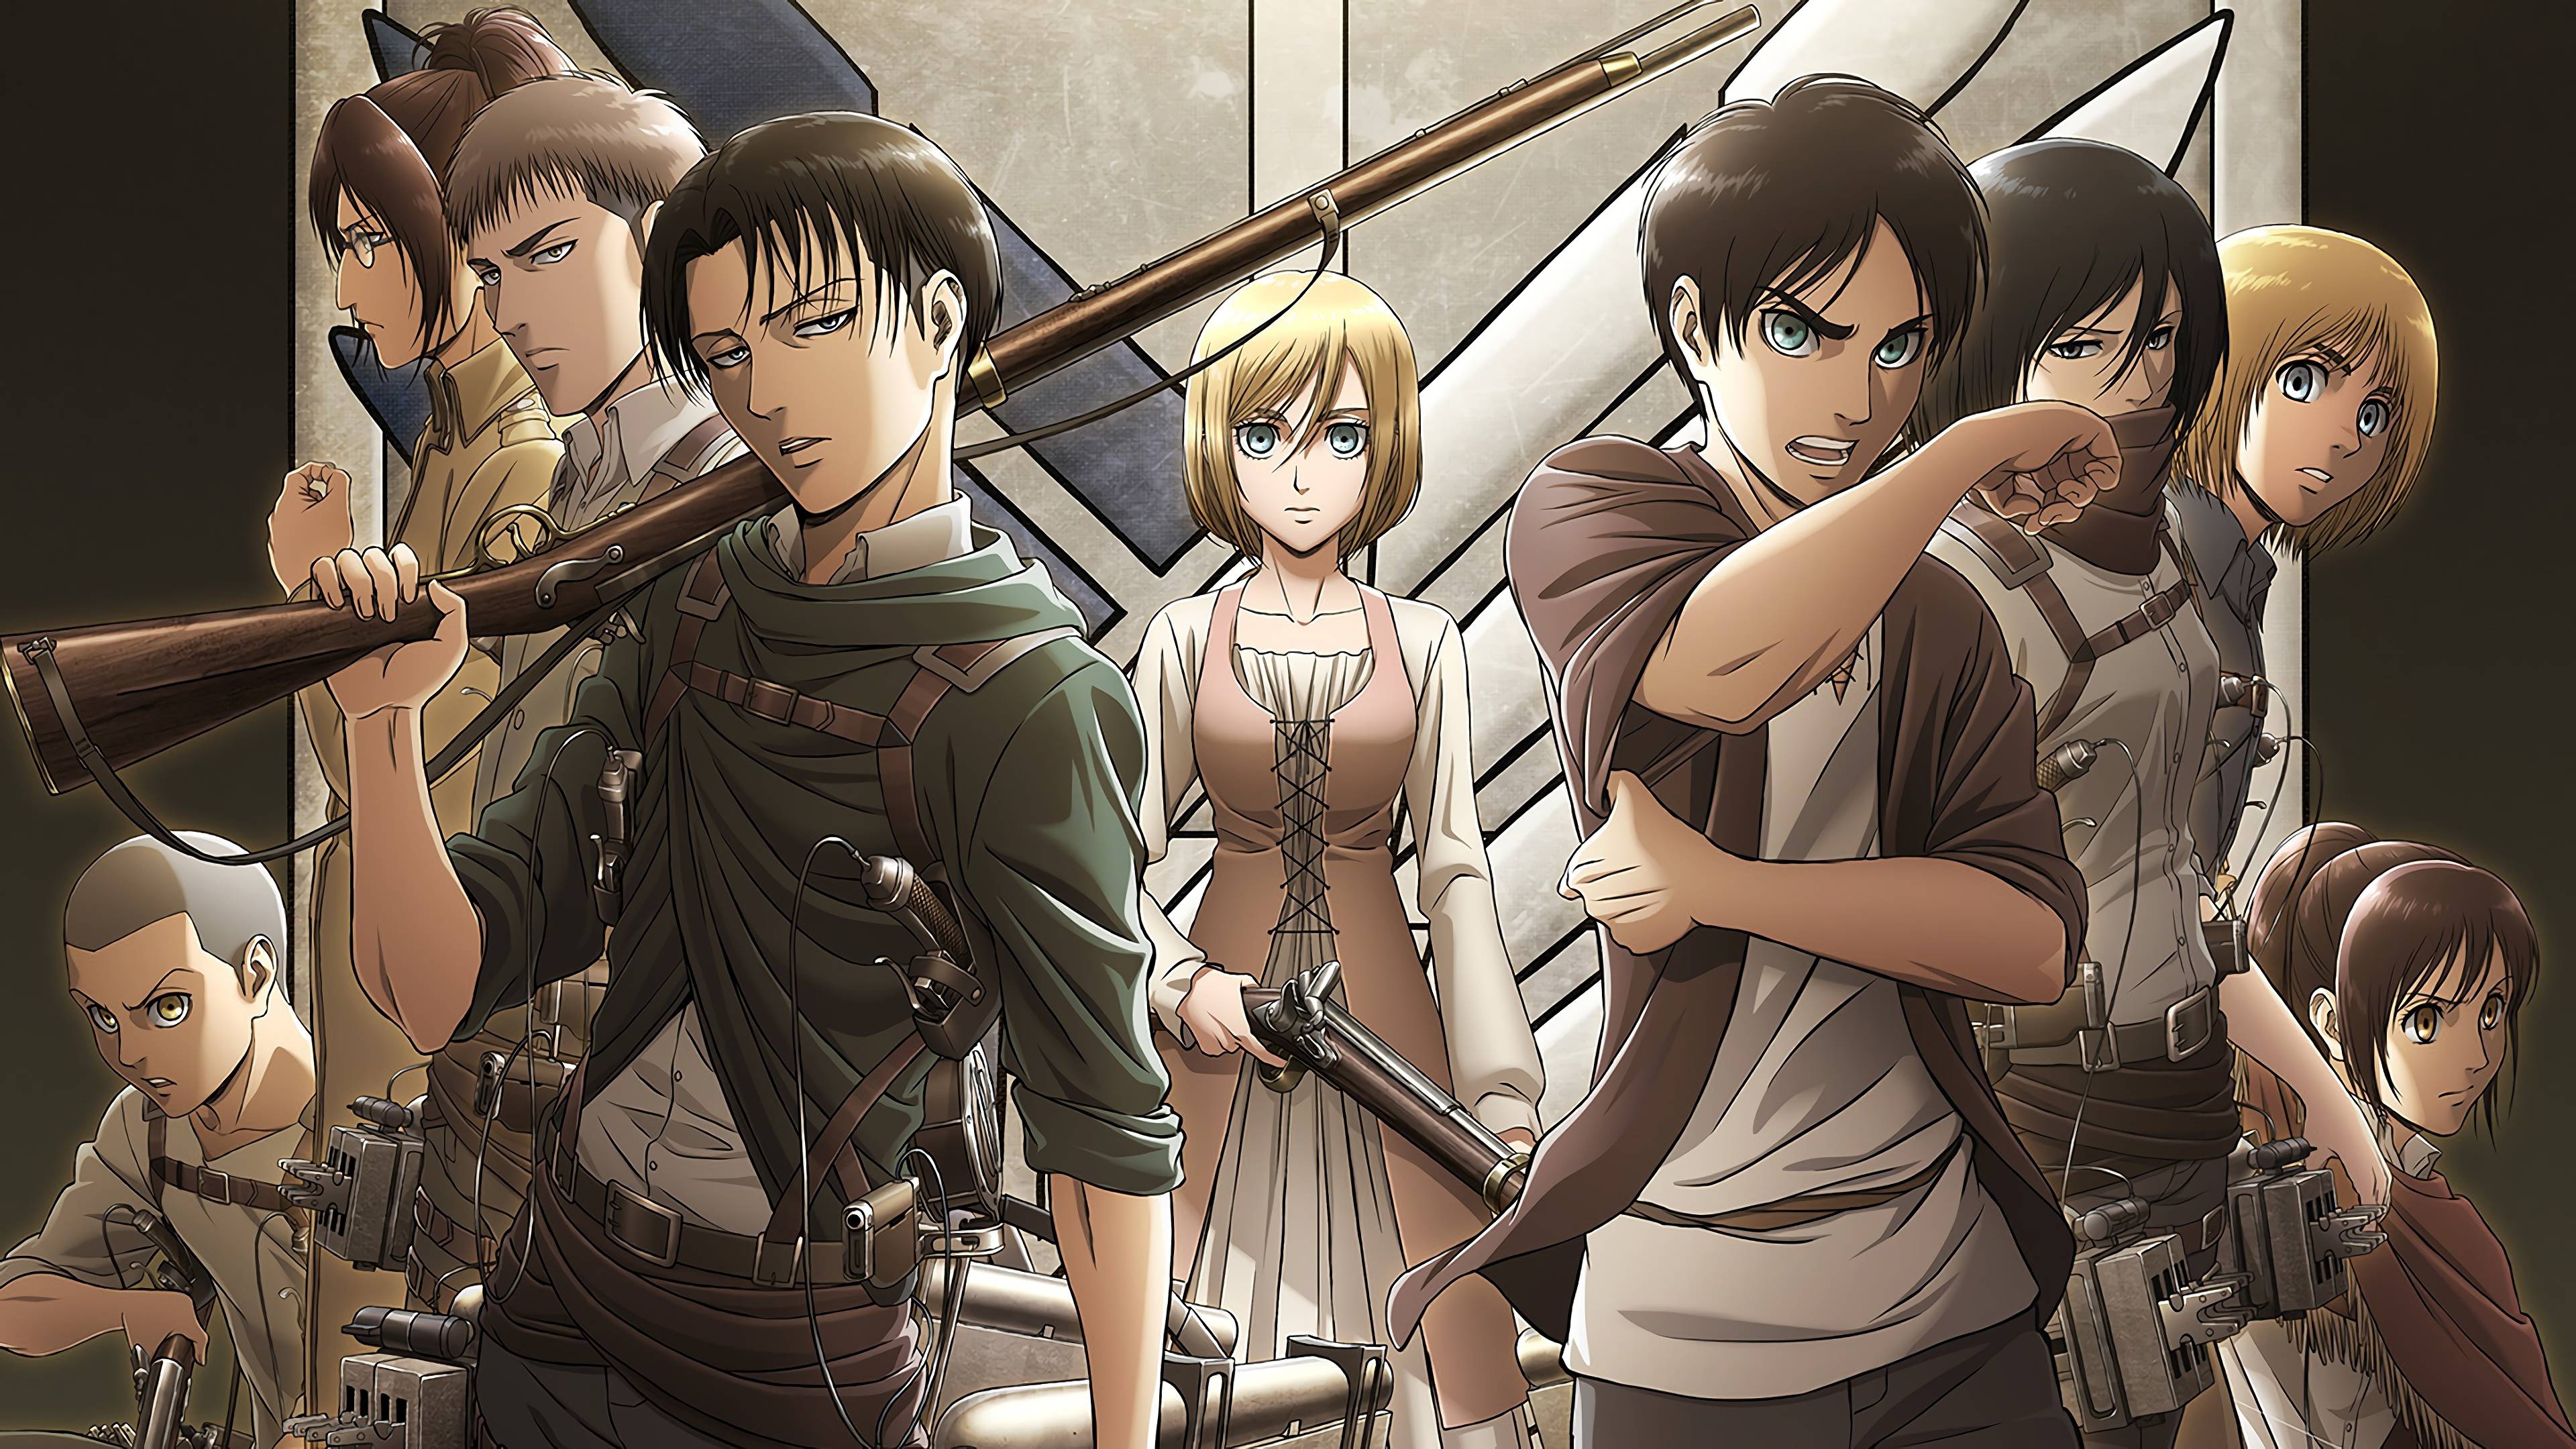 Eren and Levi Wallpaper Free Eren and Levi Background